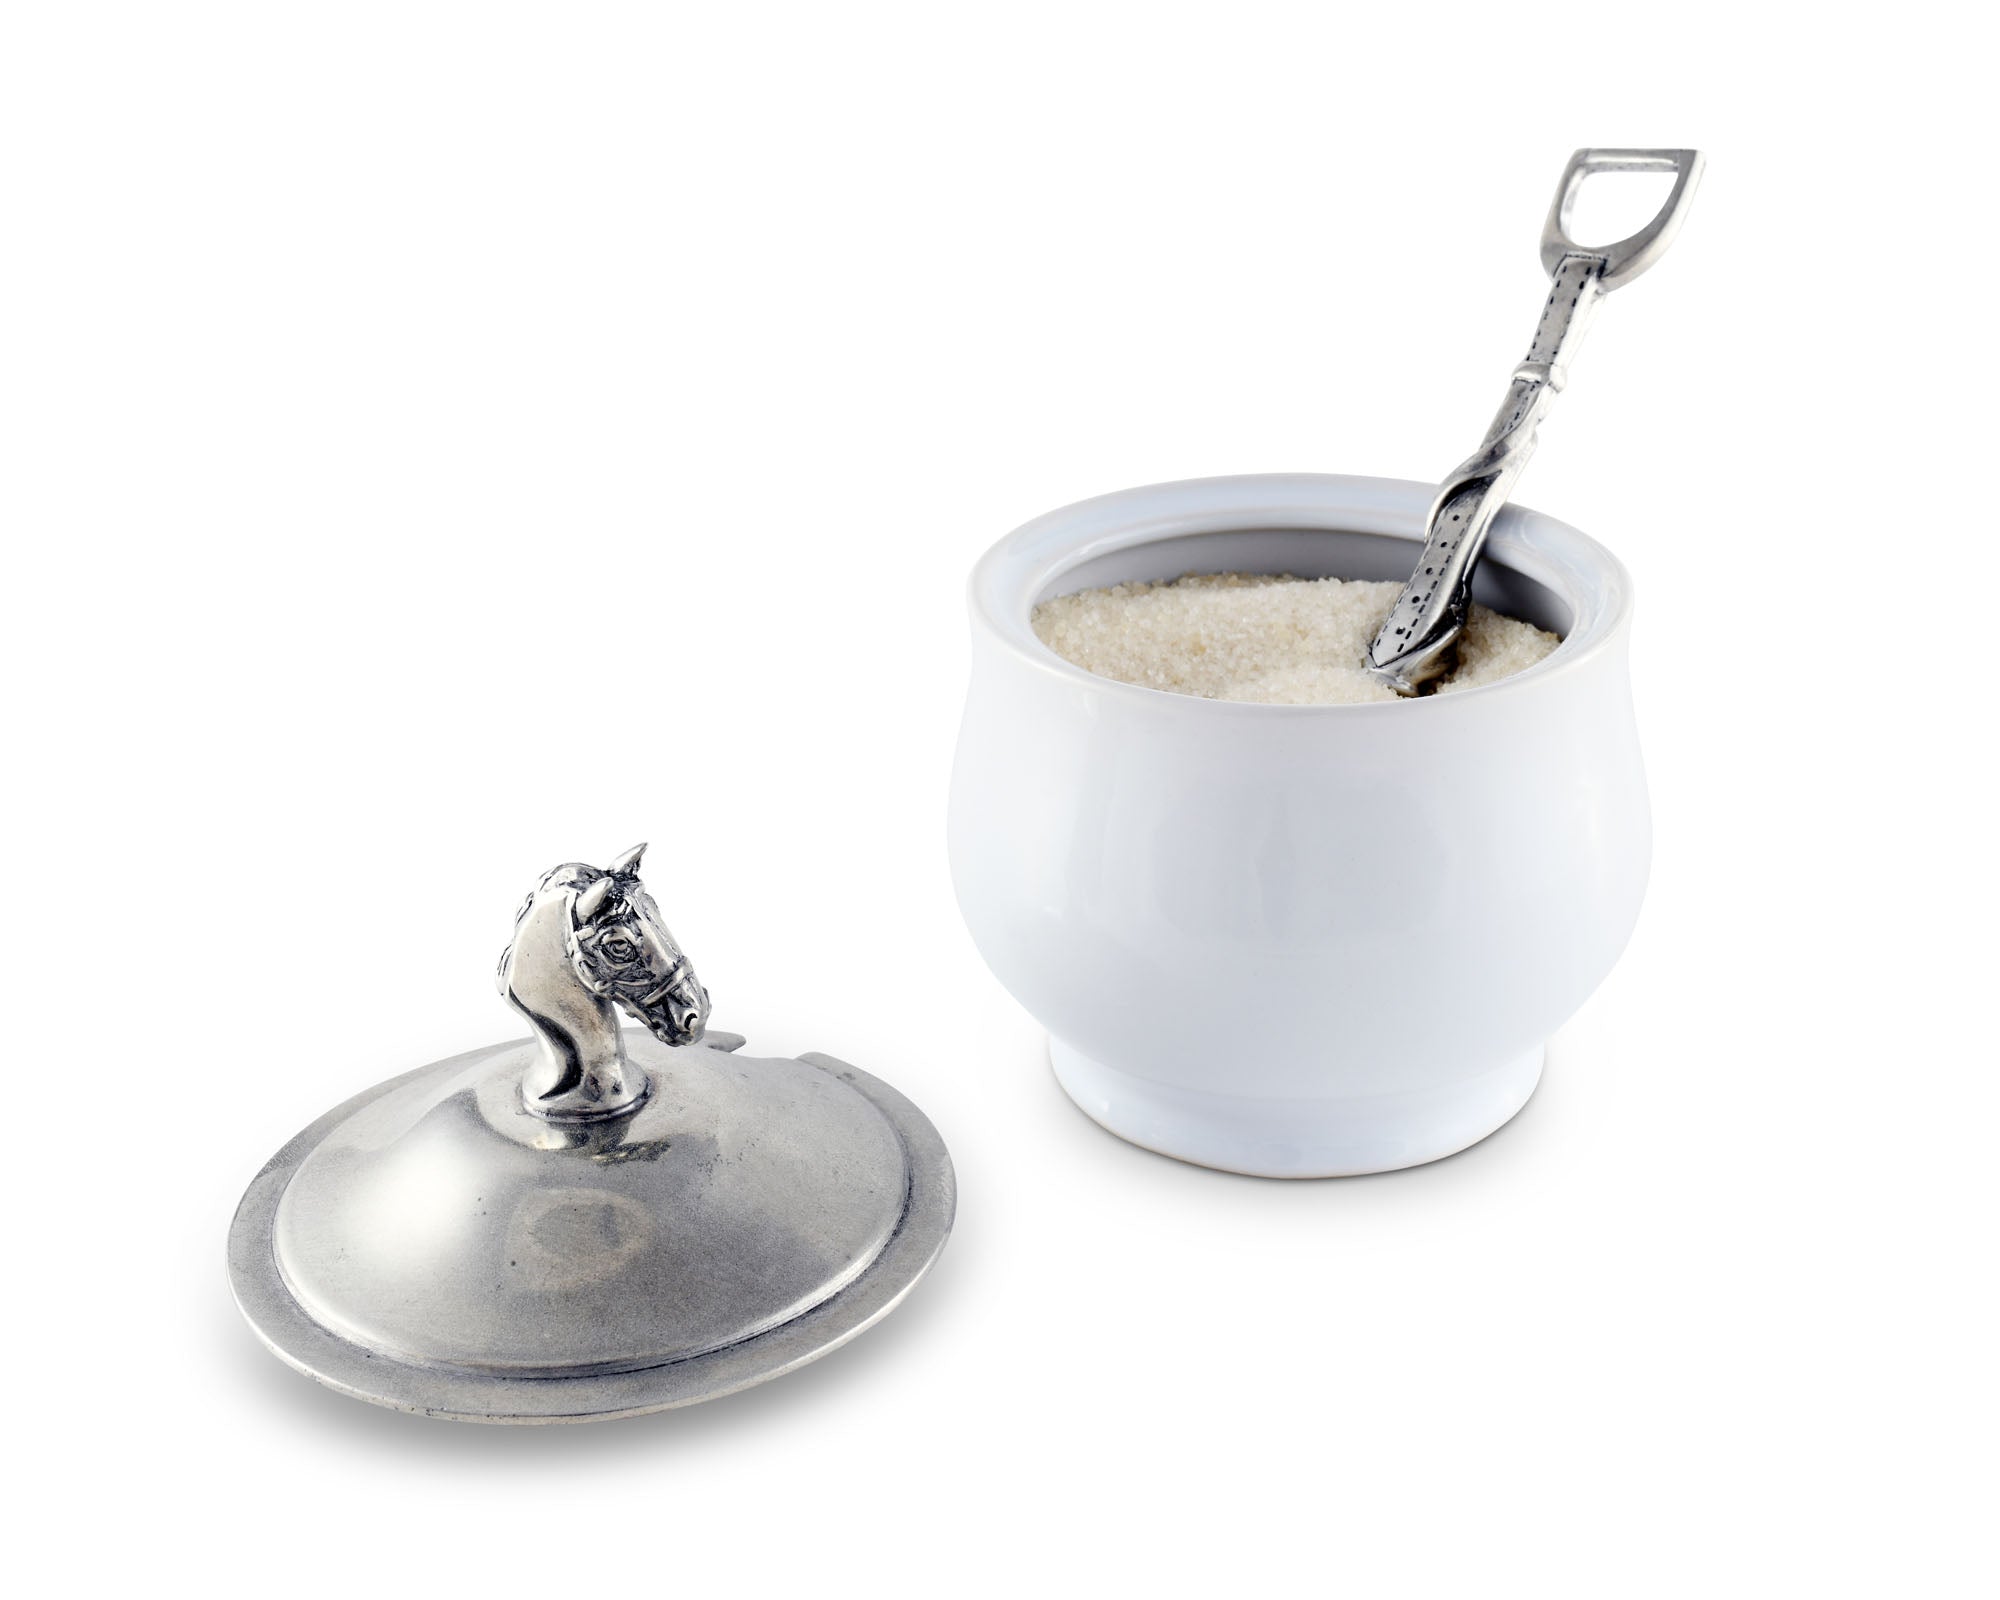 Vagabond House Equestrian Sugar Bowl and Spoon Product Image